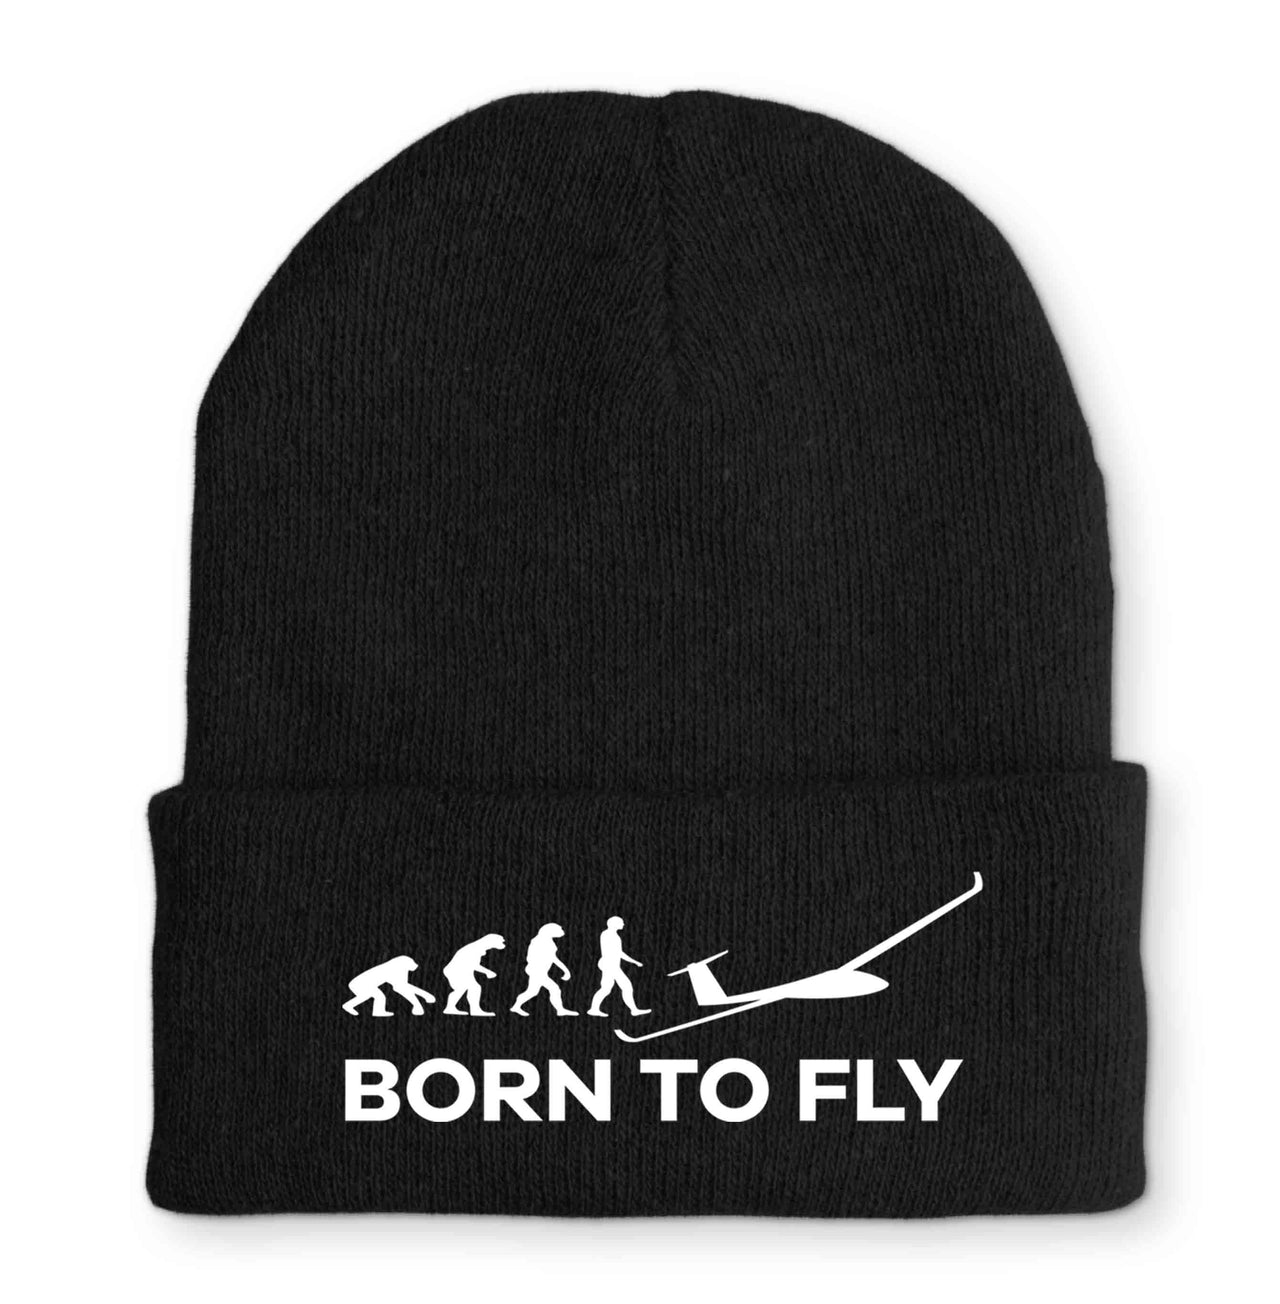 Born To Fly Glider Embroidered Beanies